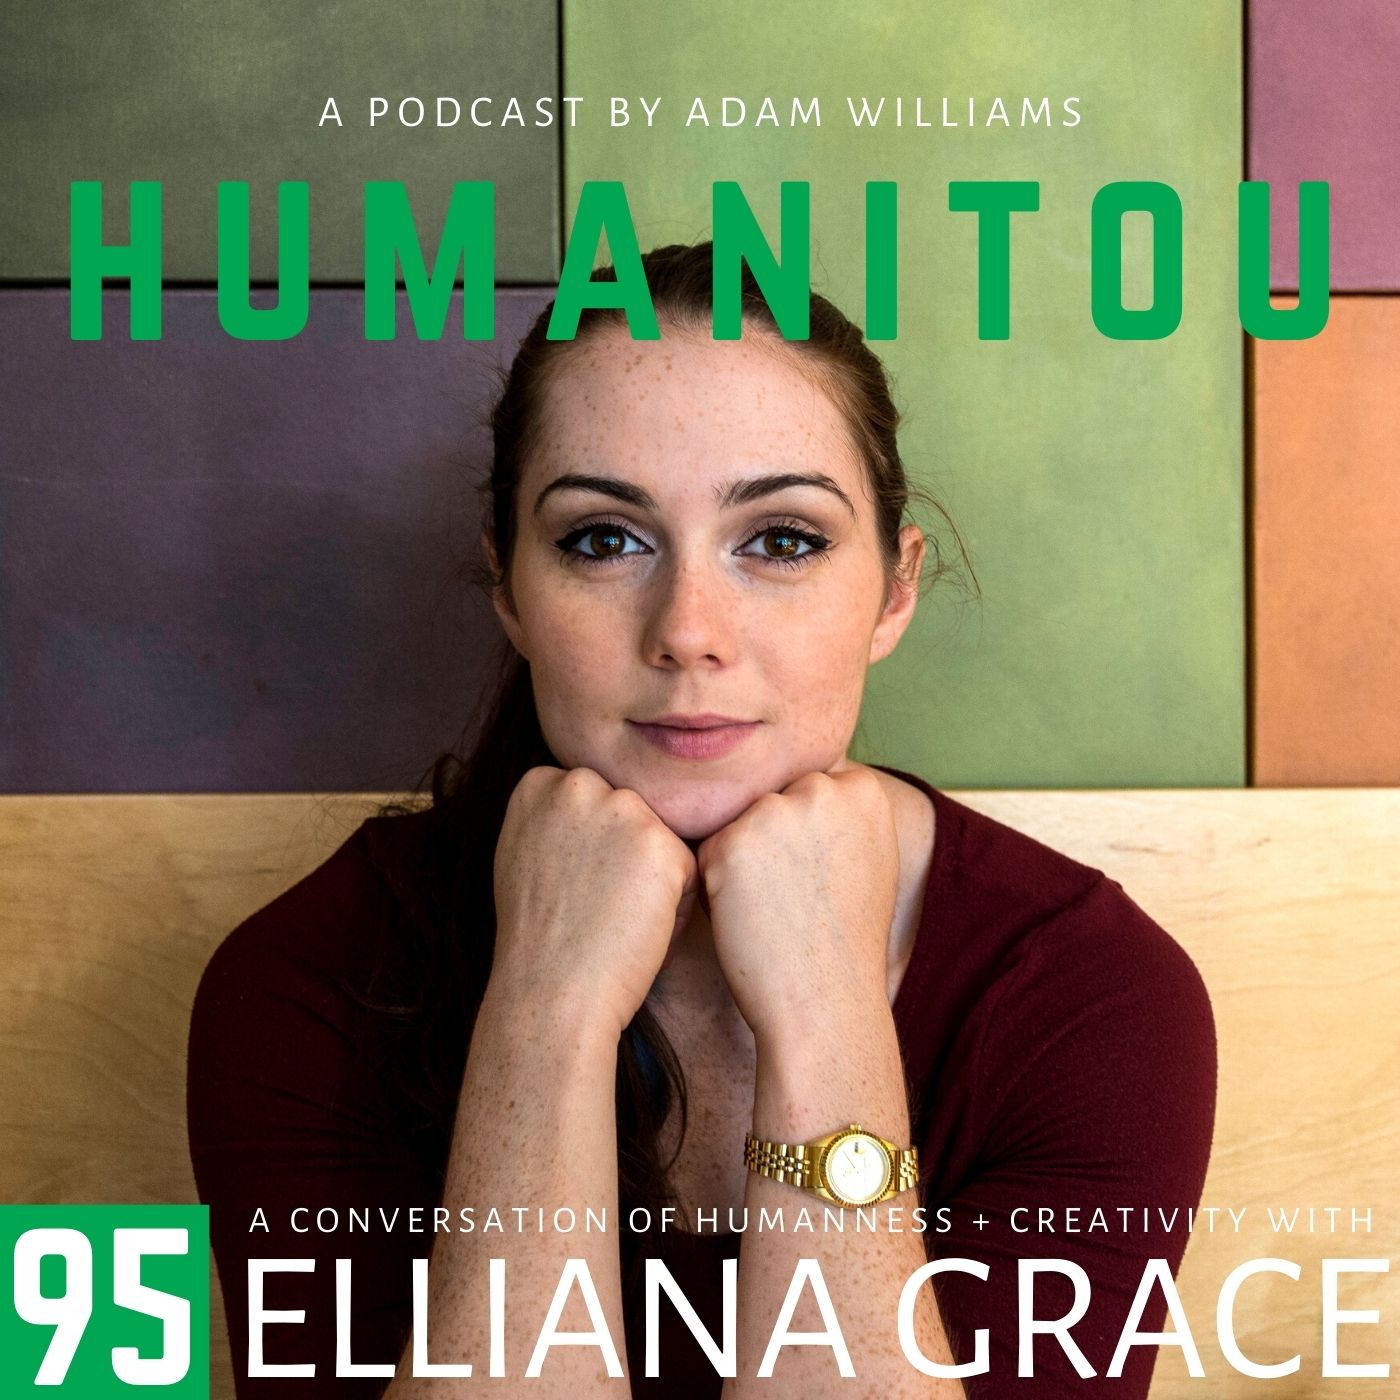 95: Elliana Grace, circus performer, on being a human cannonball, life aboard the Ringling Bros. train, growing up in a circus family, and having a famous (non-circus) grandfather